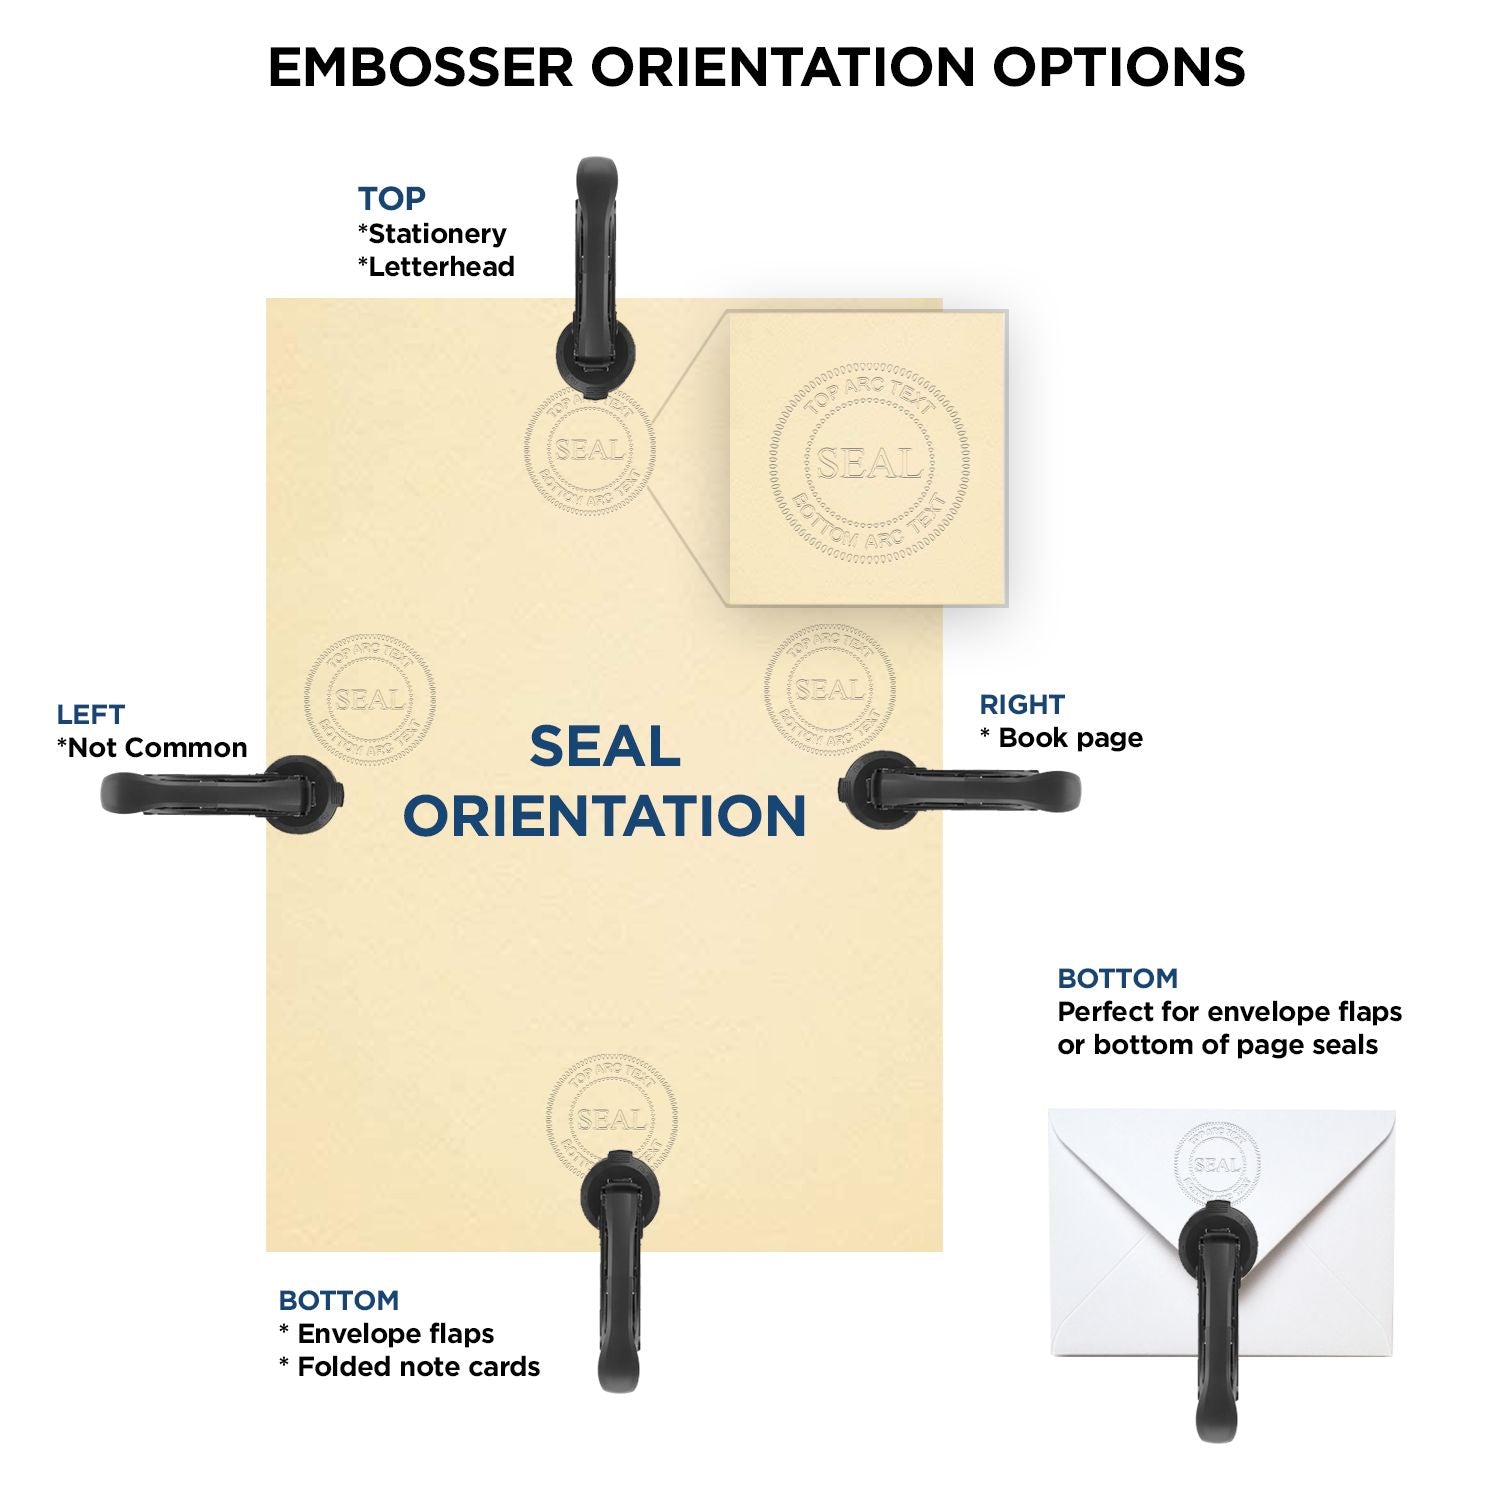 An infographic for the State of Wisconsin Extended Long Reach Engineer Seal showing embosser orientation, this is showing examples of a top, bottom, right and left insert.